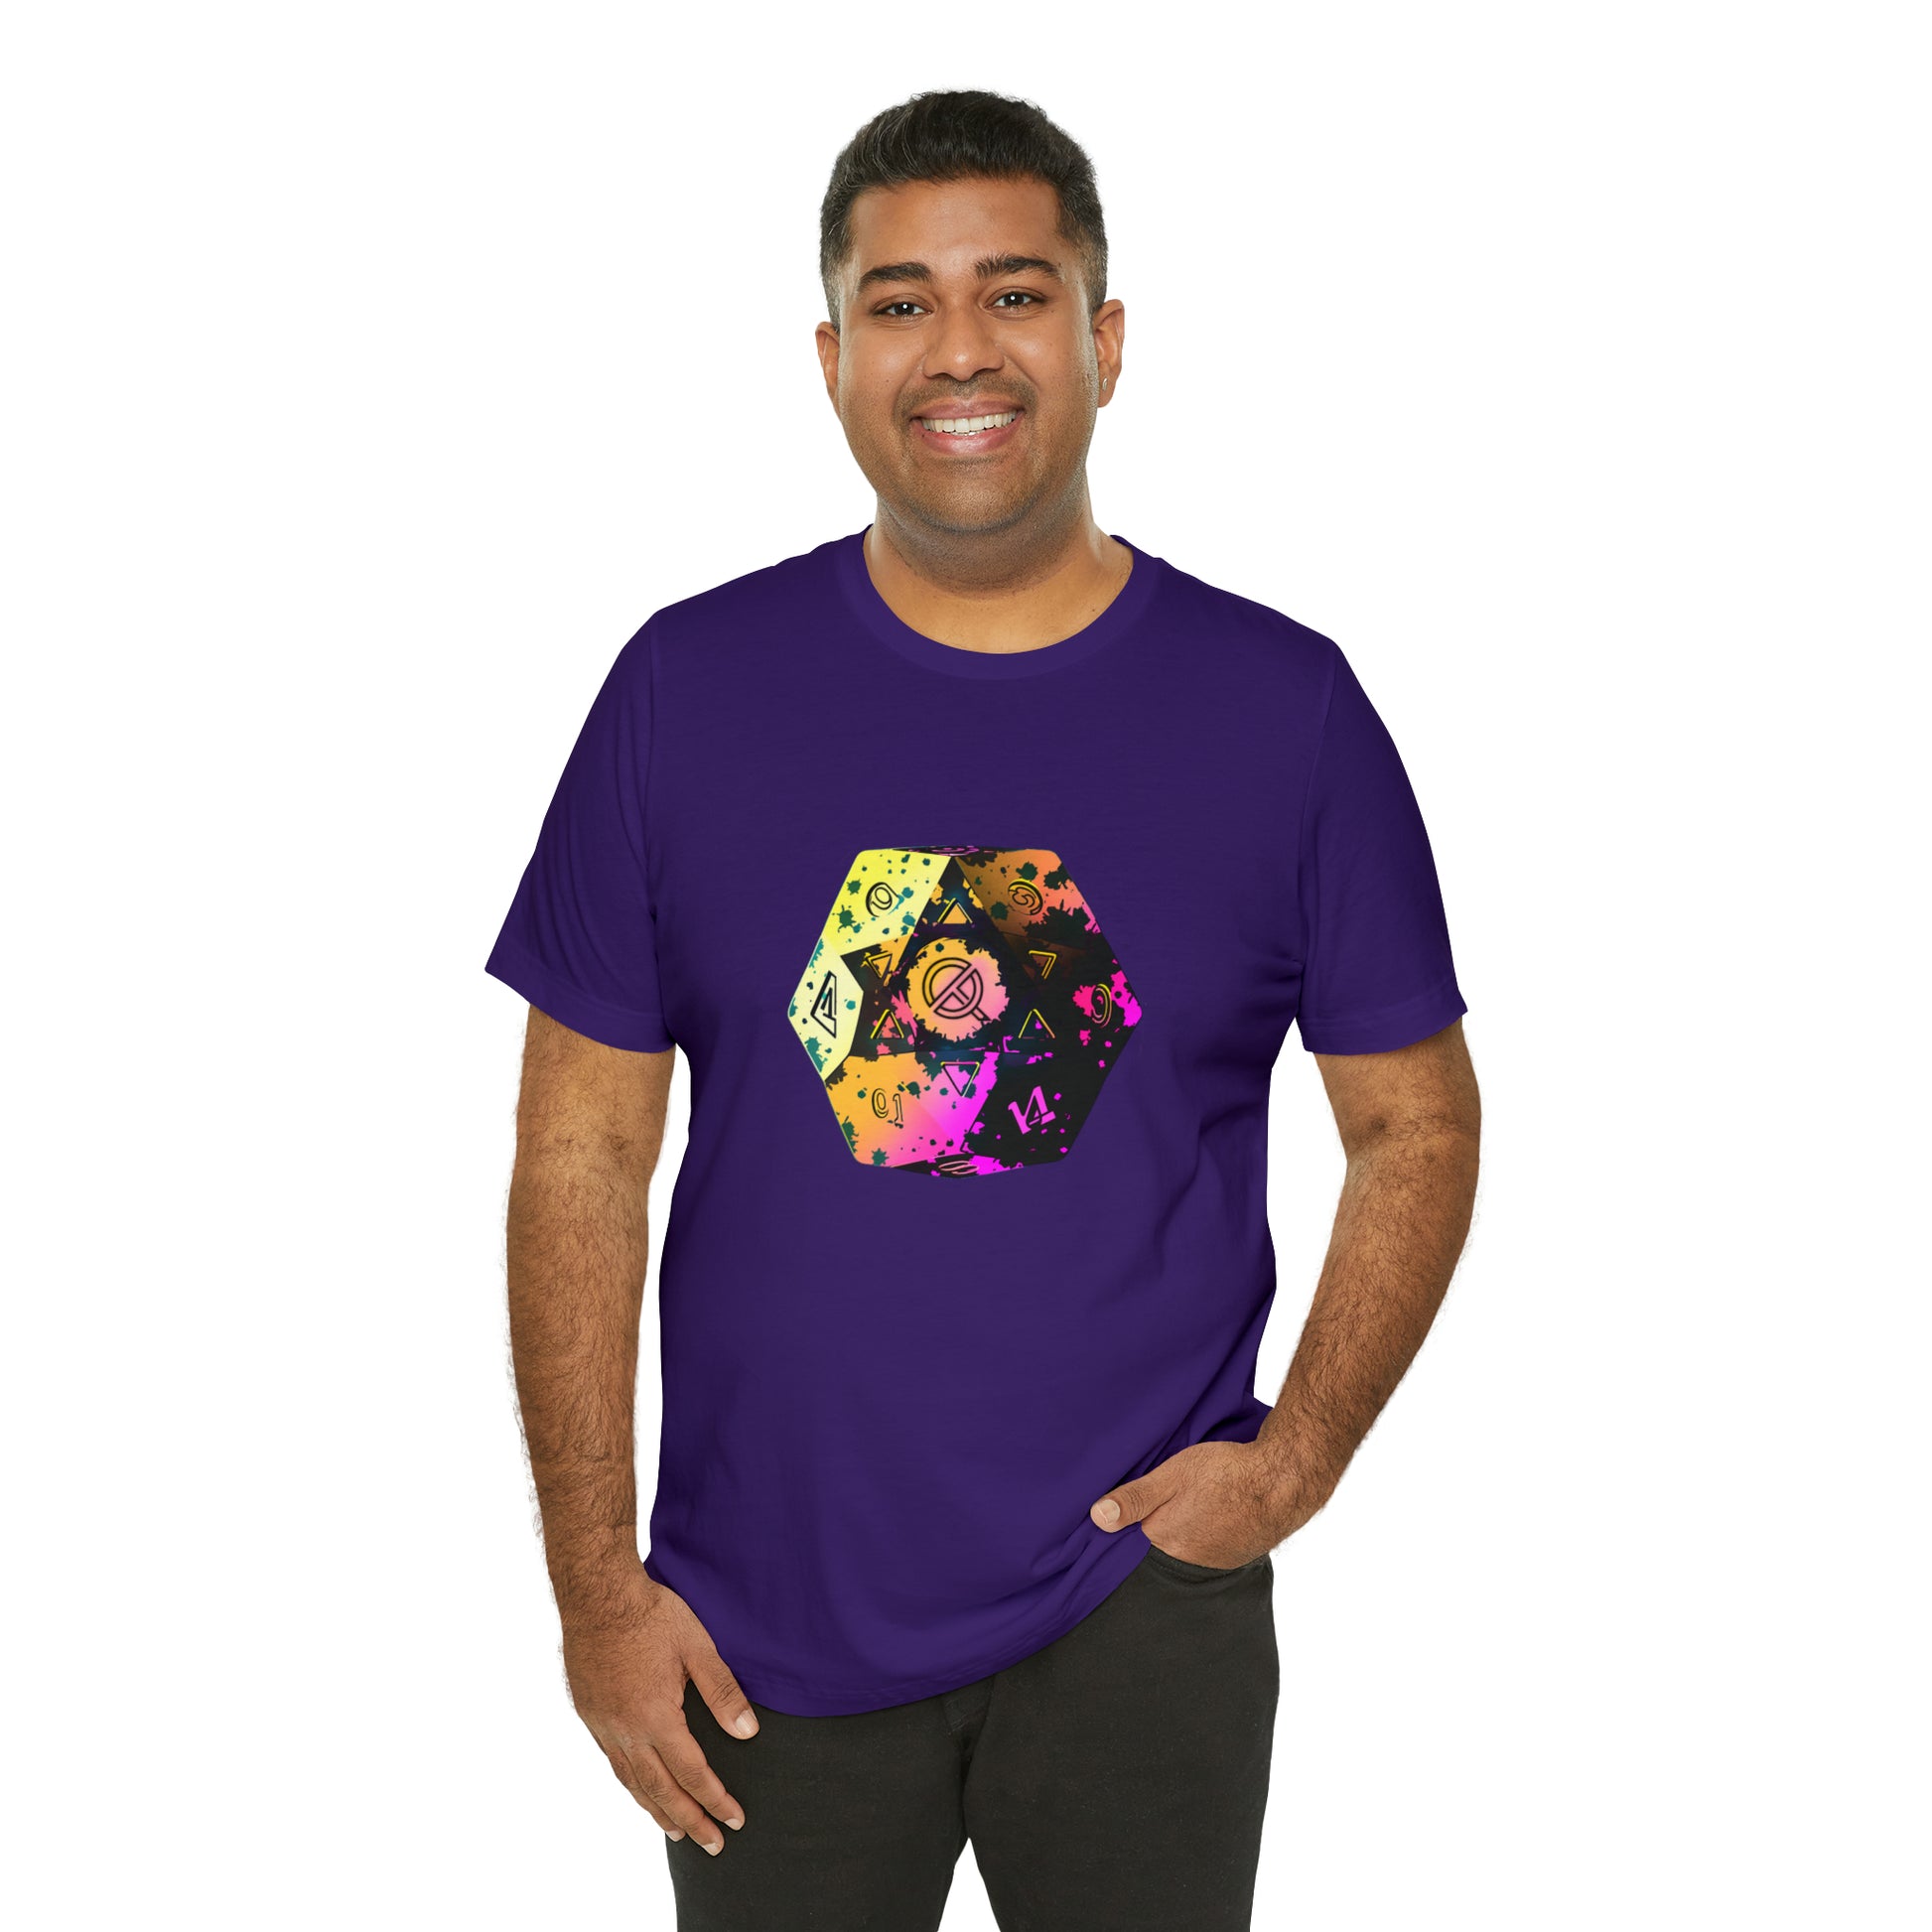 team-purple-quest-thread-tee-shirt-with-large-neon-d20-dice-on-center